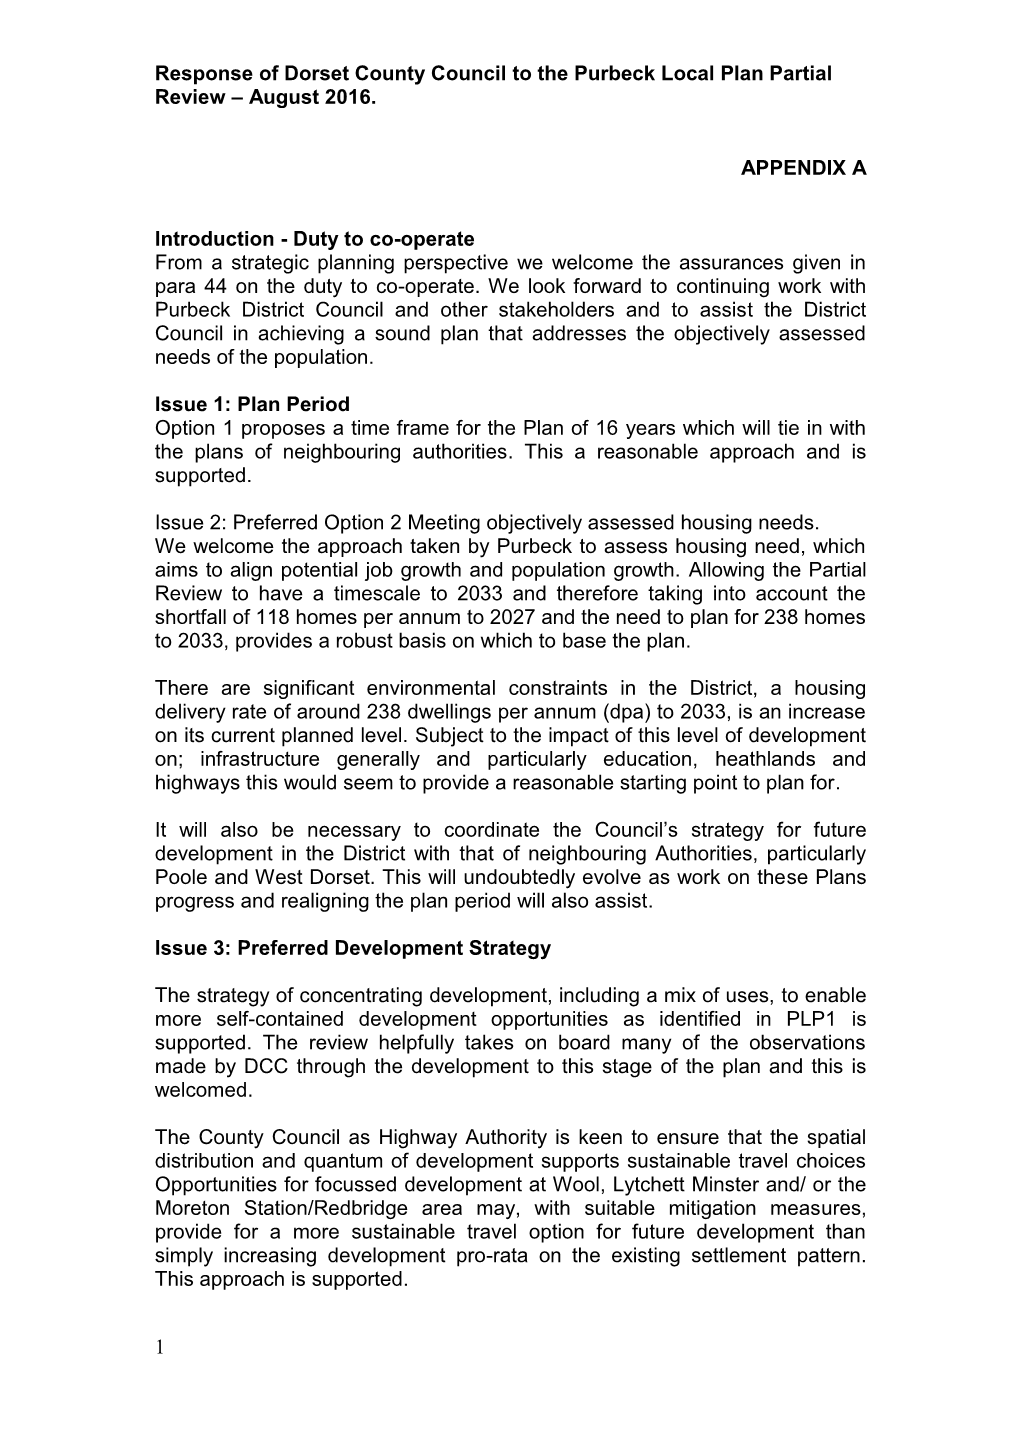 Response of Dorset County Council to the Purbeck Local Plan Part 1 Partial Review